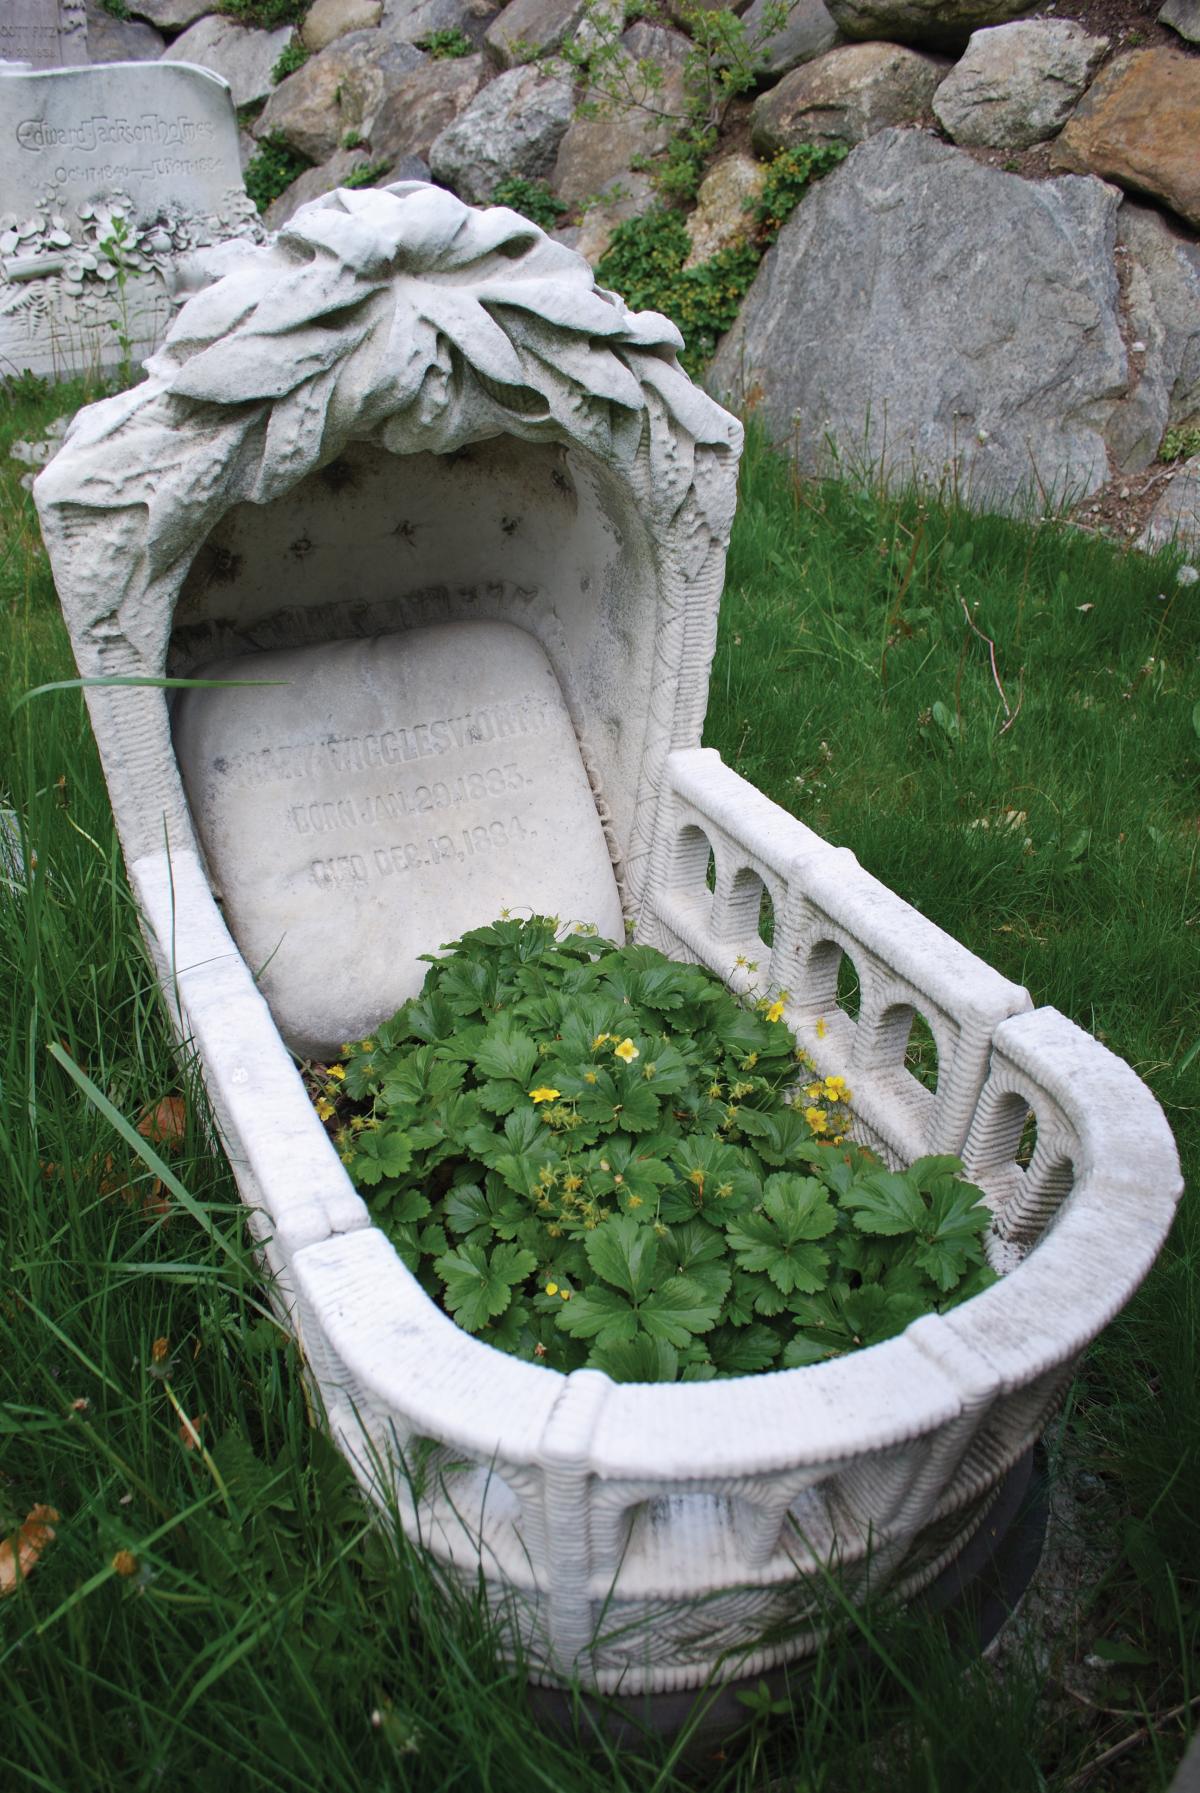 Photograph of a headstone carved into the shape of a cradle